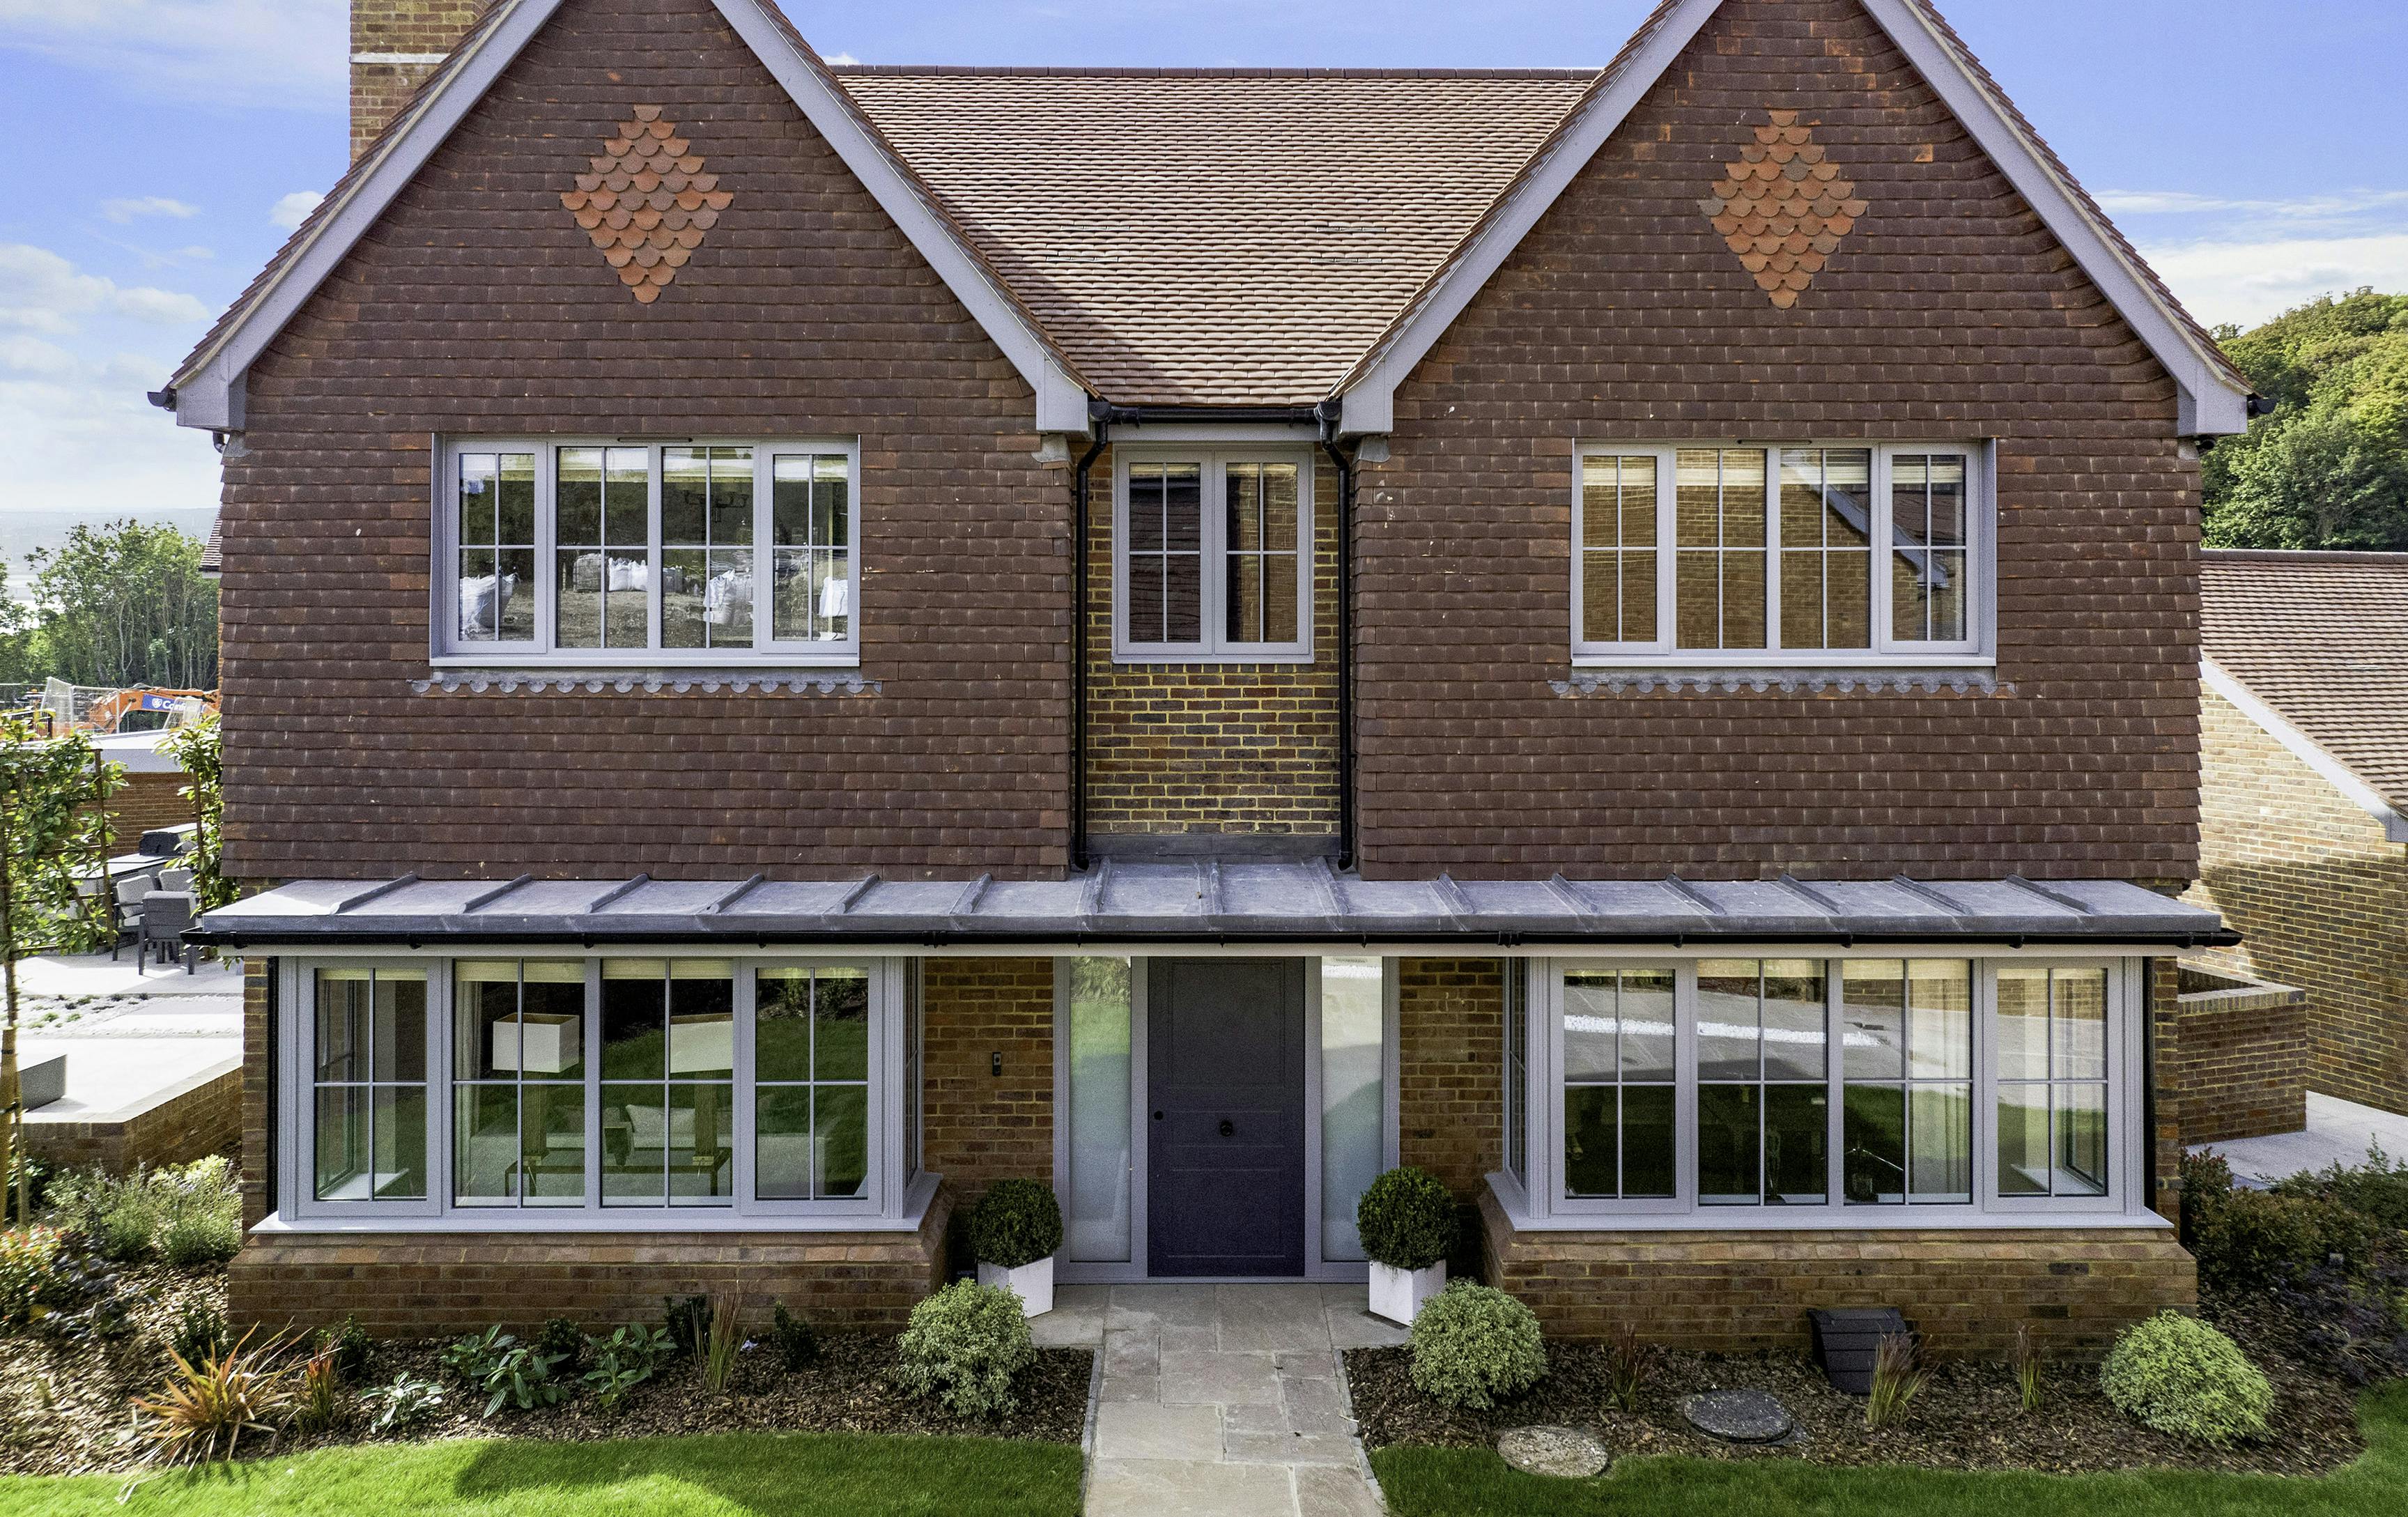 A luxurious double fronted red brick, new build home, featuring a mae-to-measure, Deuren front door in the classic Georgian style, painted drak grey and with two satin glazed side lights.